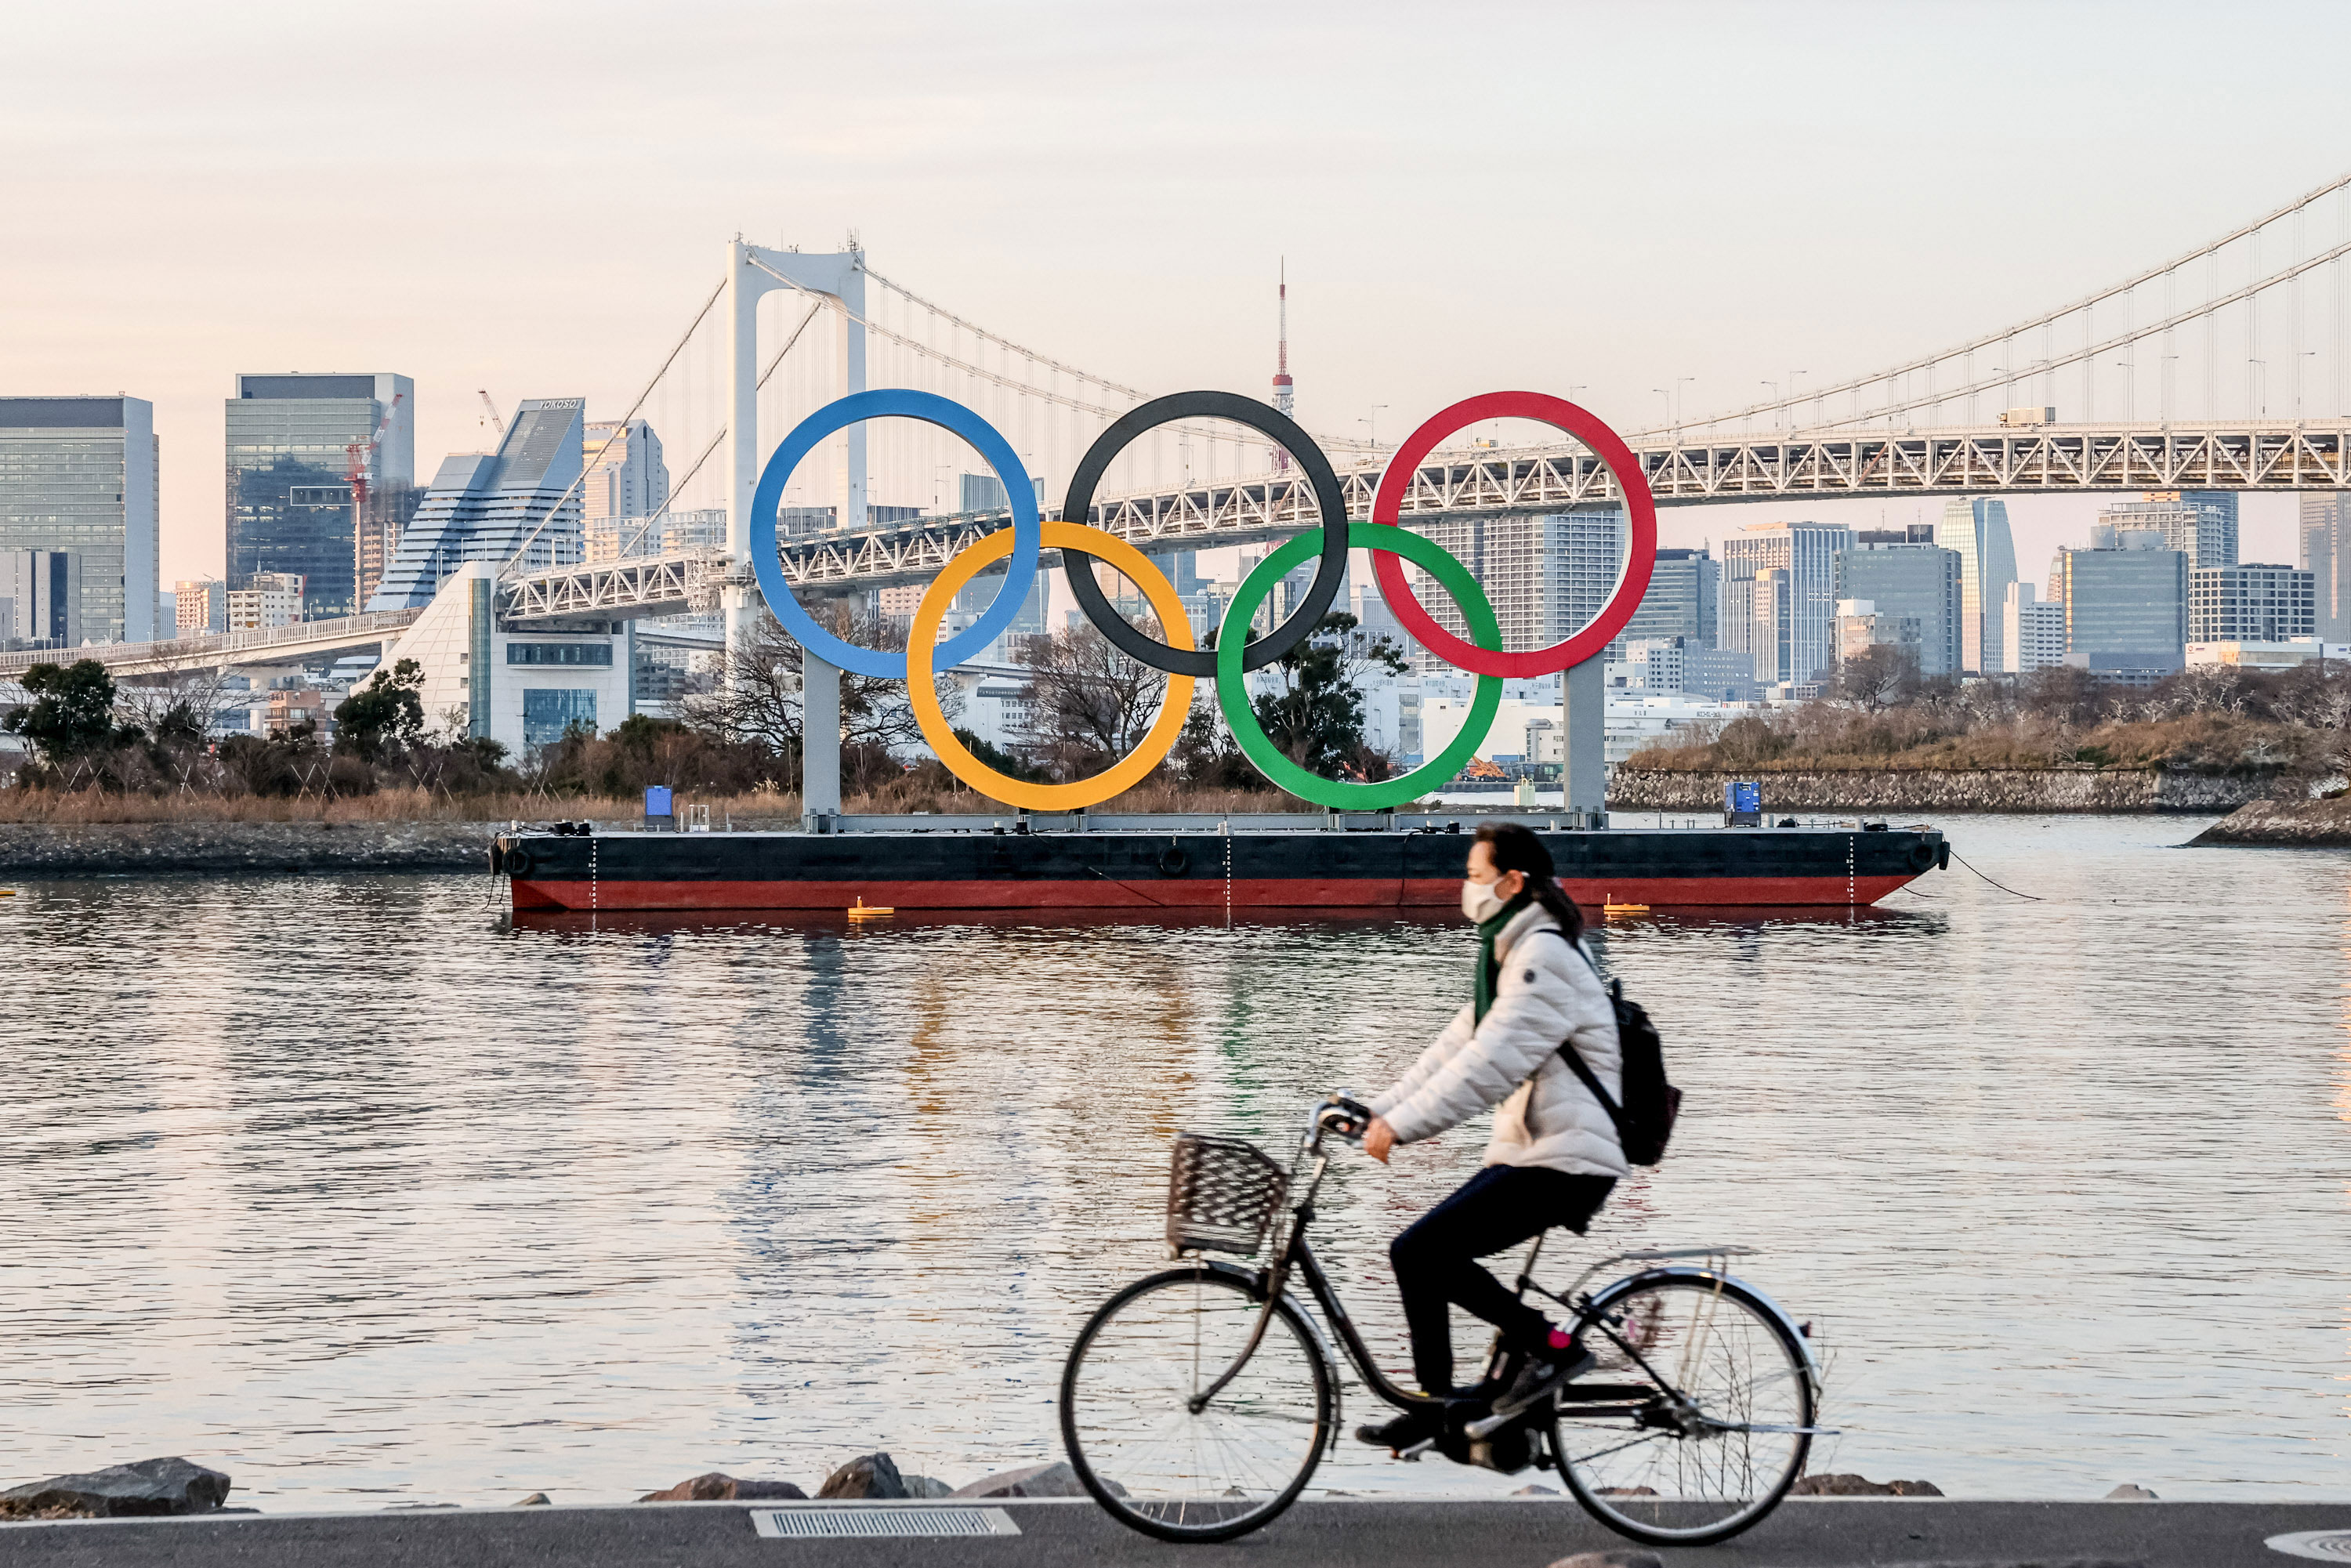 A person rides by the Olympic symbol in Tokyo on January 25.